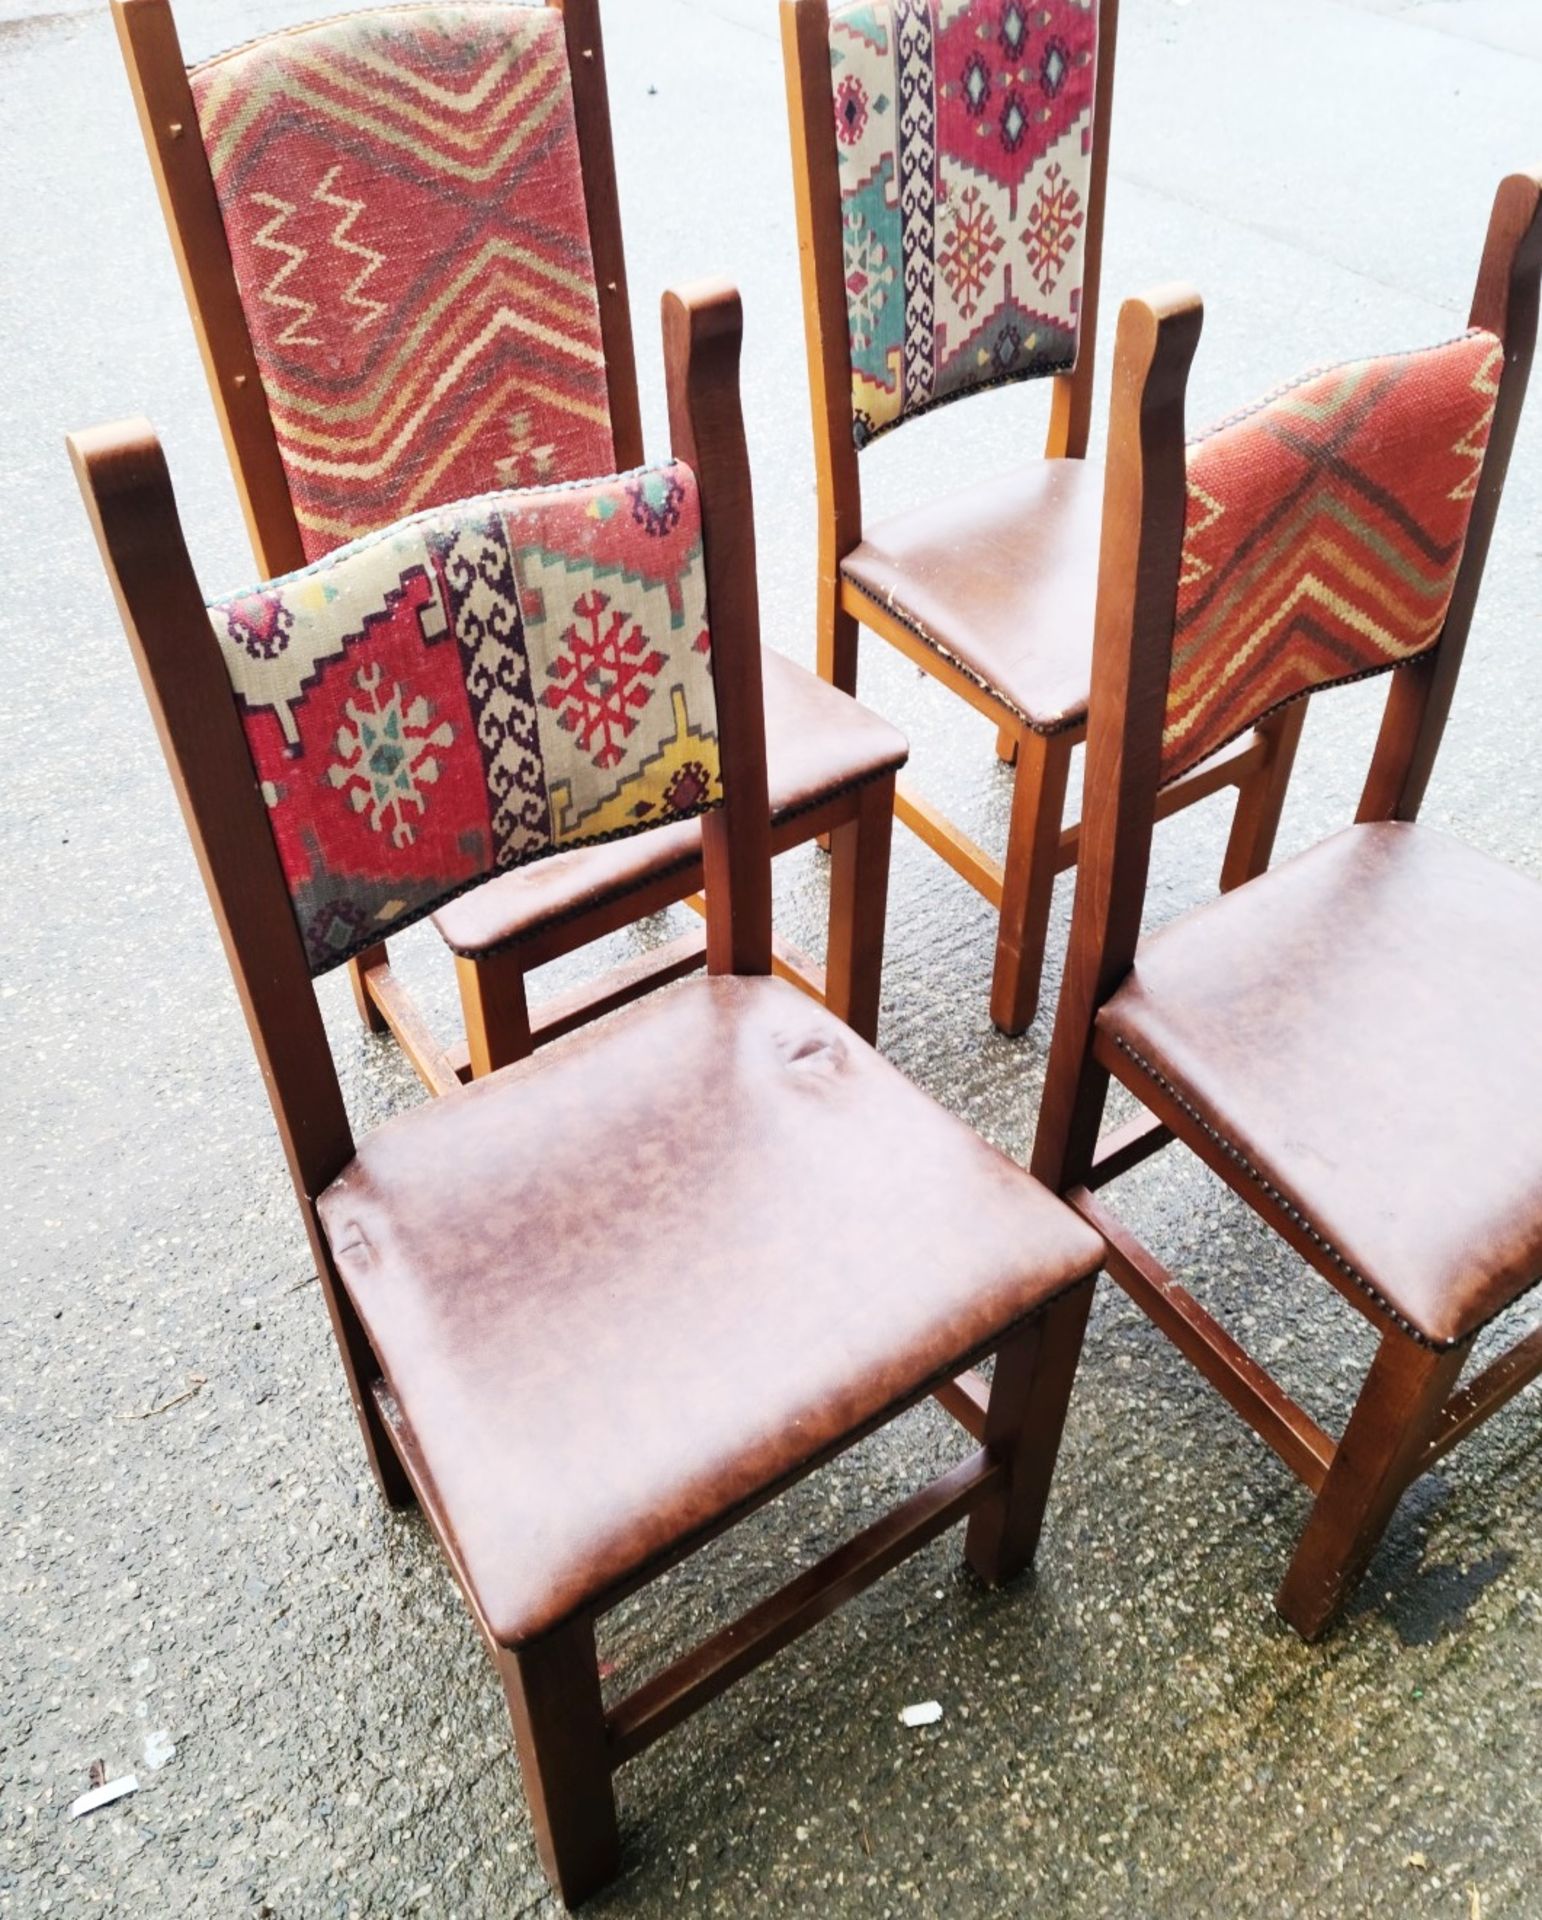 Set Of 5 x Aztec Print Dining Chairs With Faux Brown Leather Seating & Studded Seams - Image 3 of 5